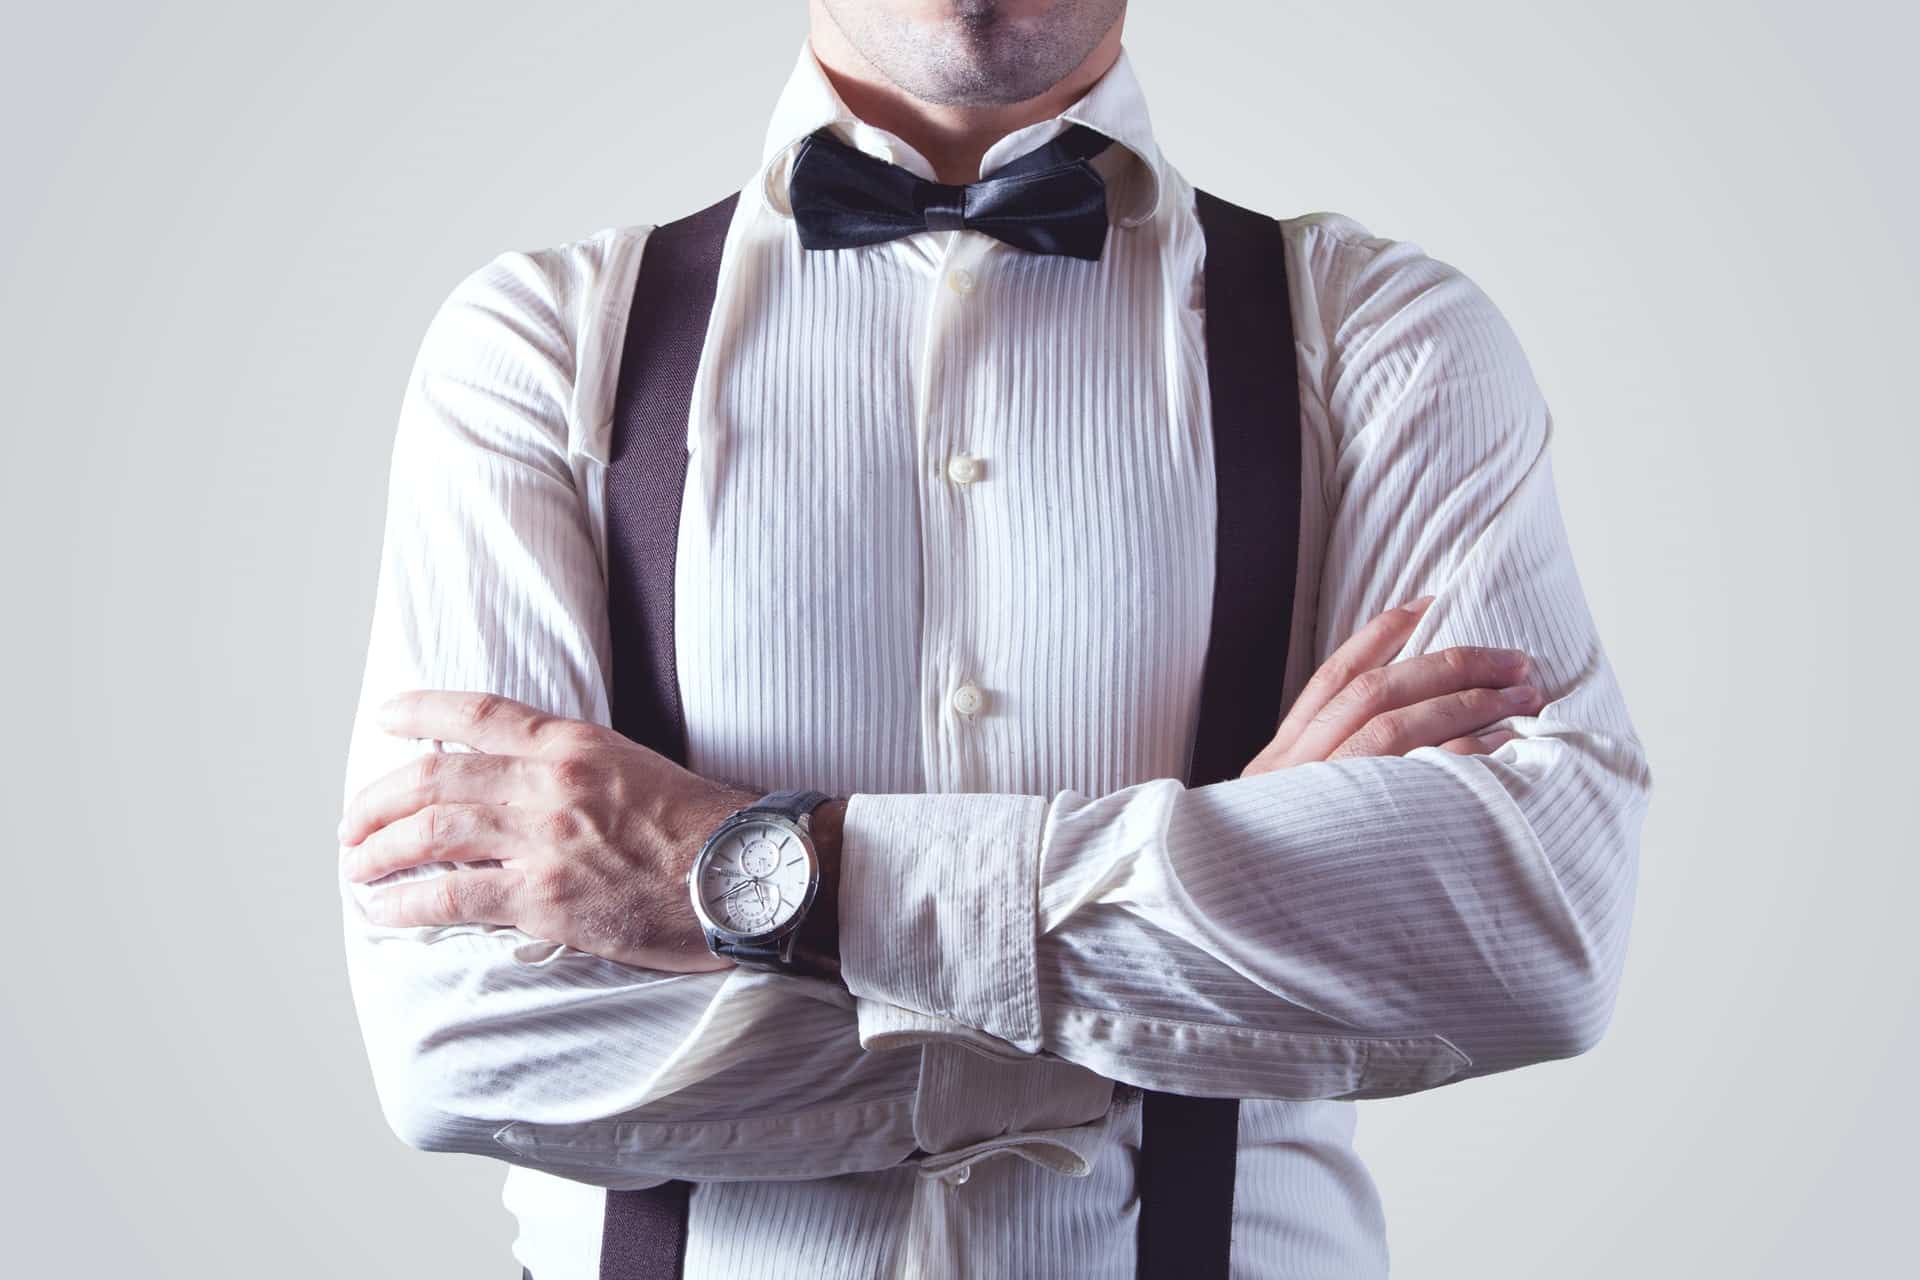 Businessman with bow tie and fashionable outfit